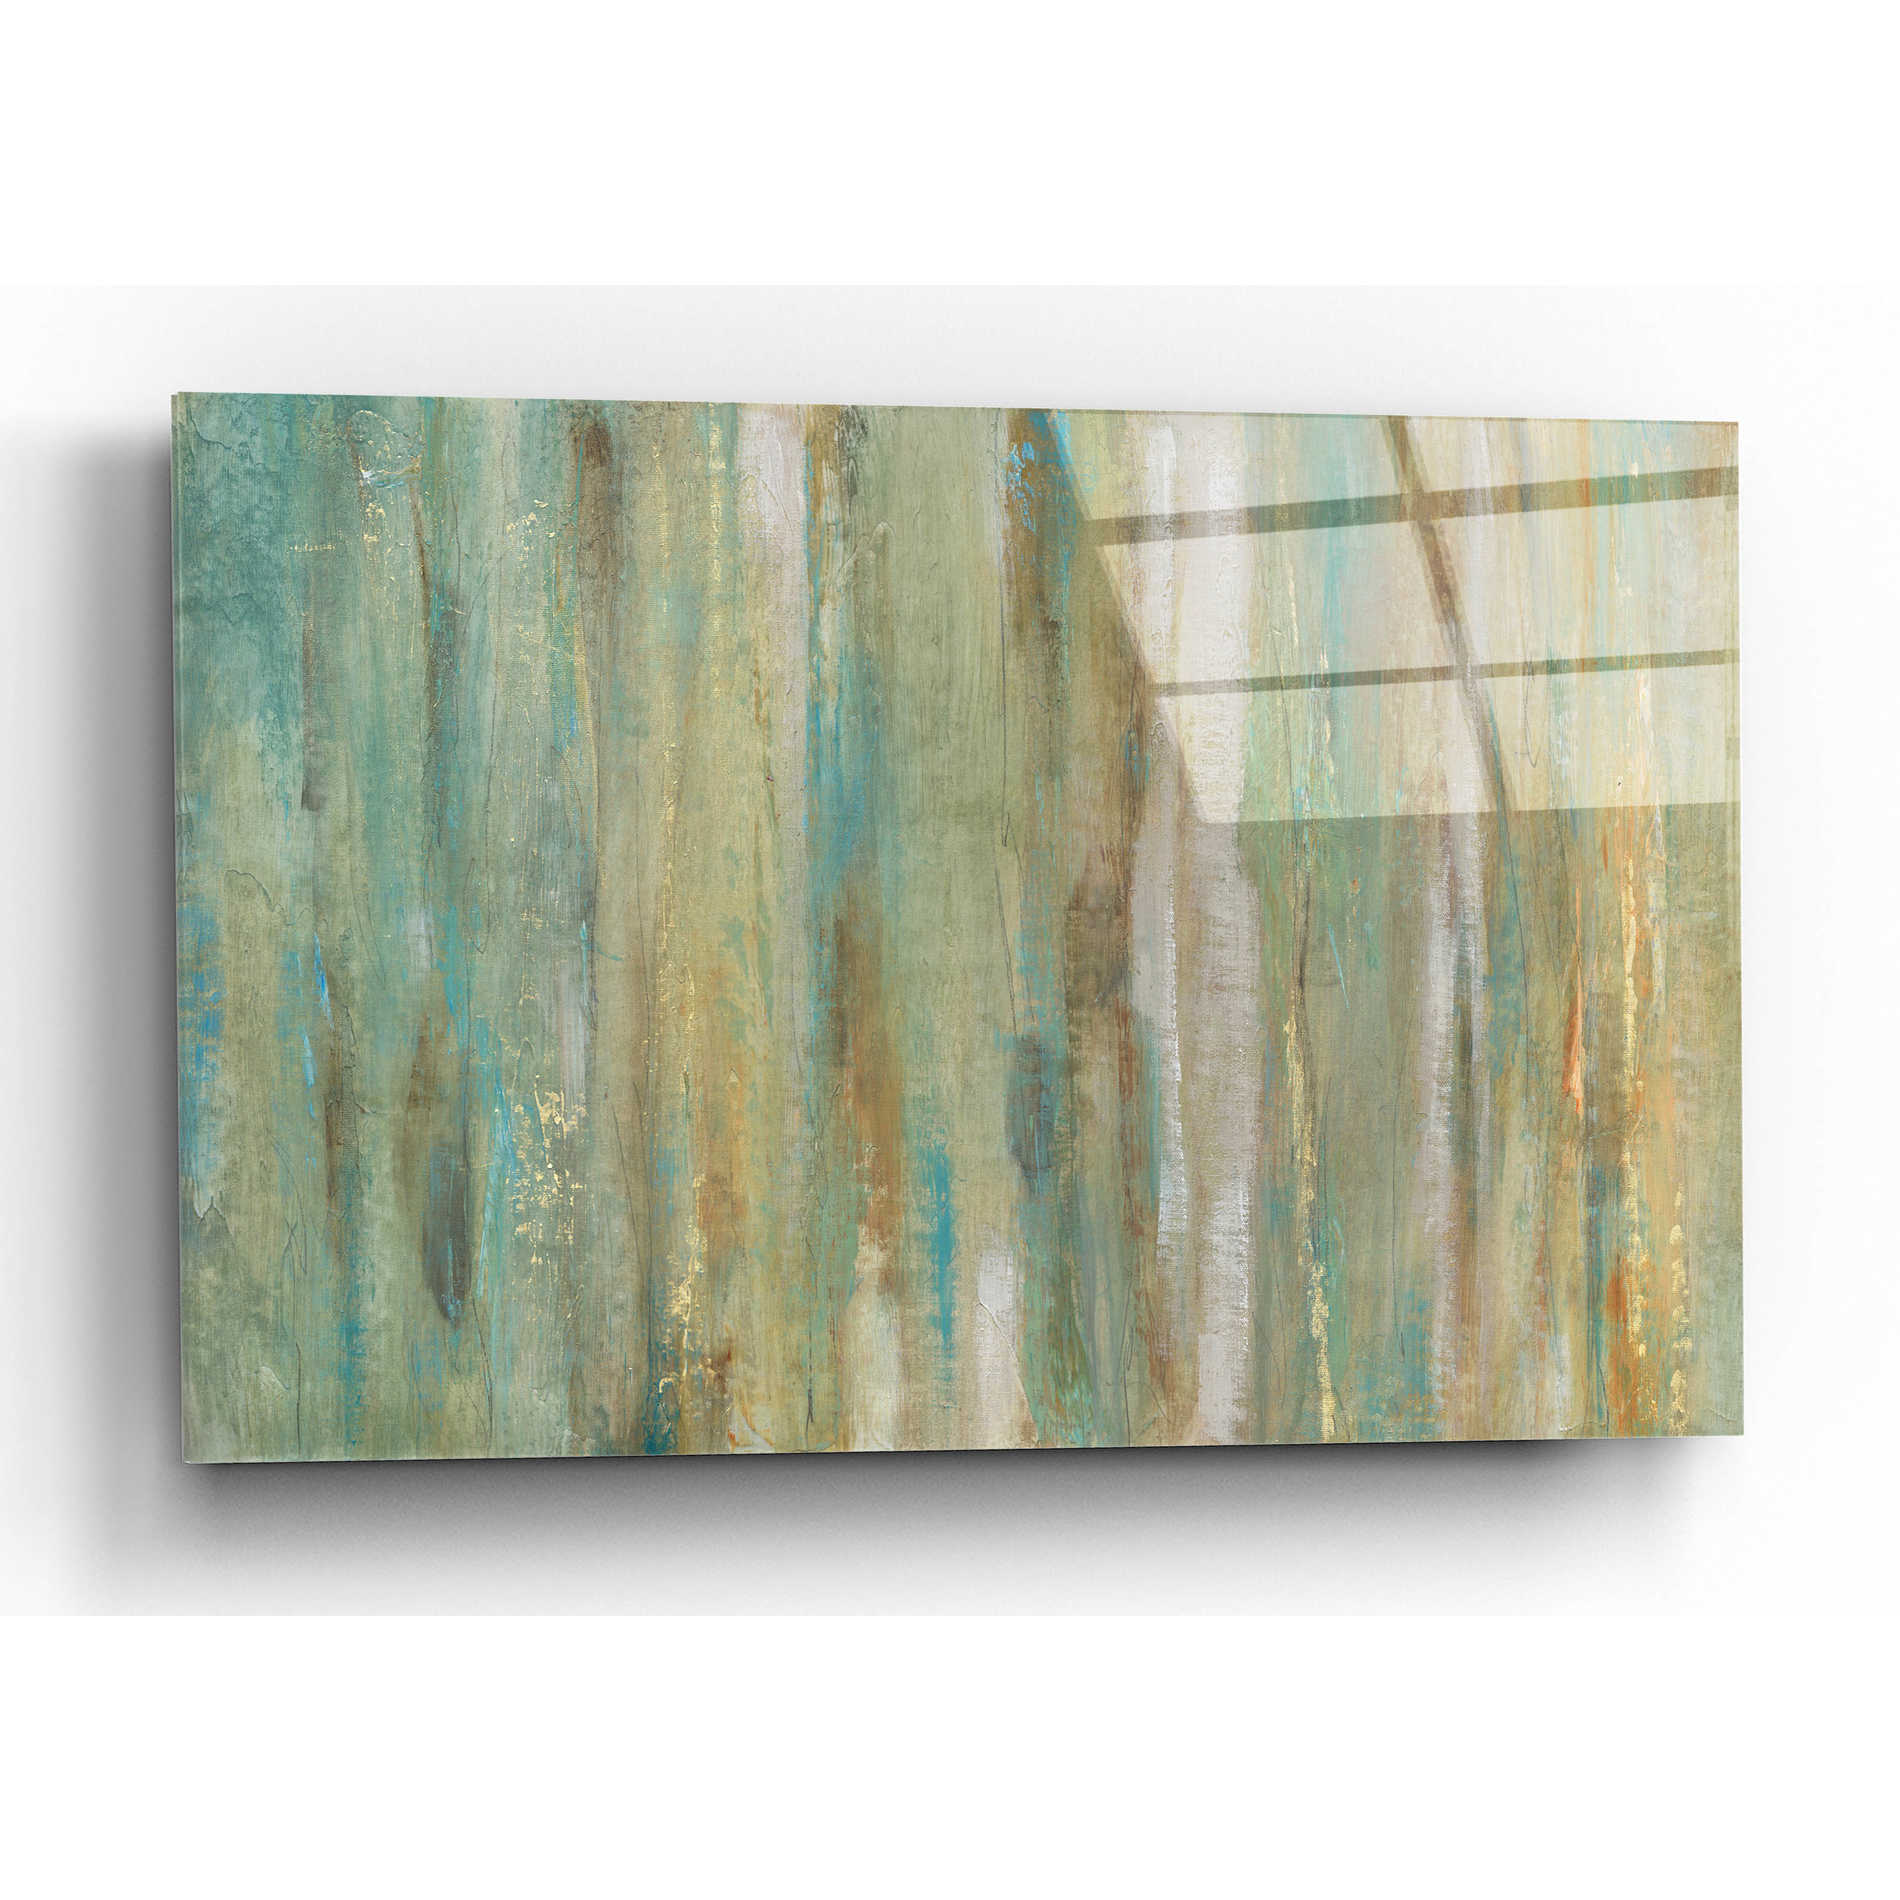 Epic Art 'Vertical Flow I' by Tim O'Toole, Acrylic Glass Wall Art,16x12